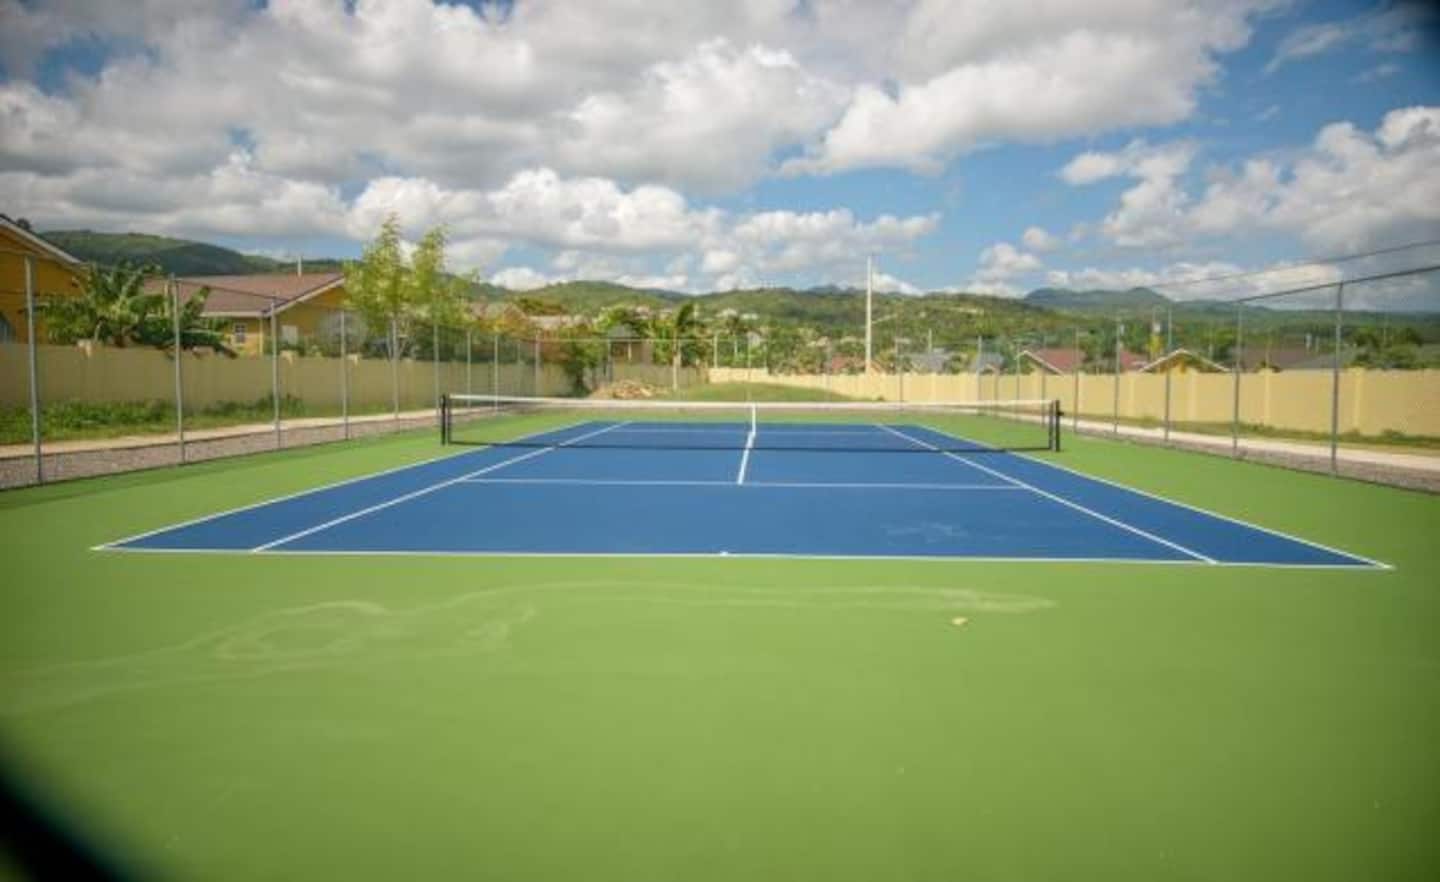 Community Tennis Court and Jogging Path